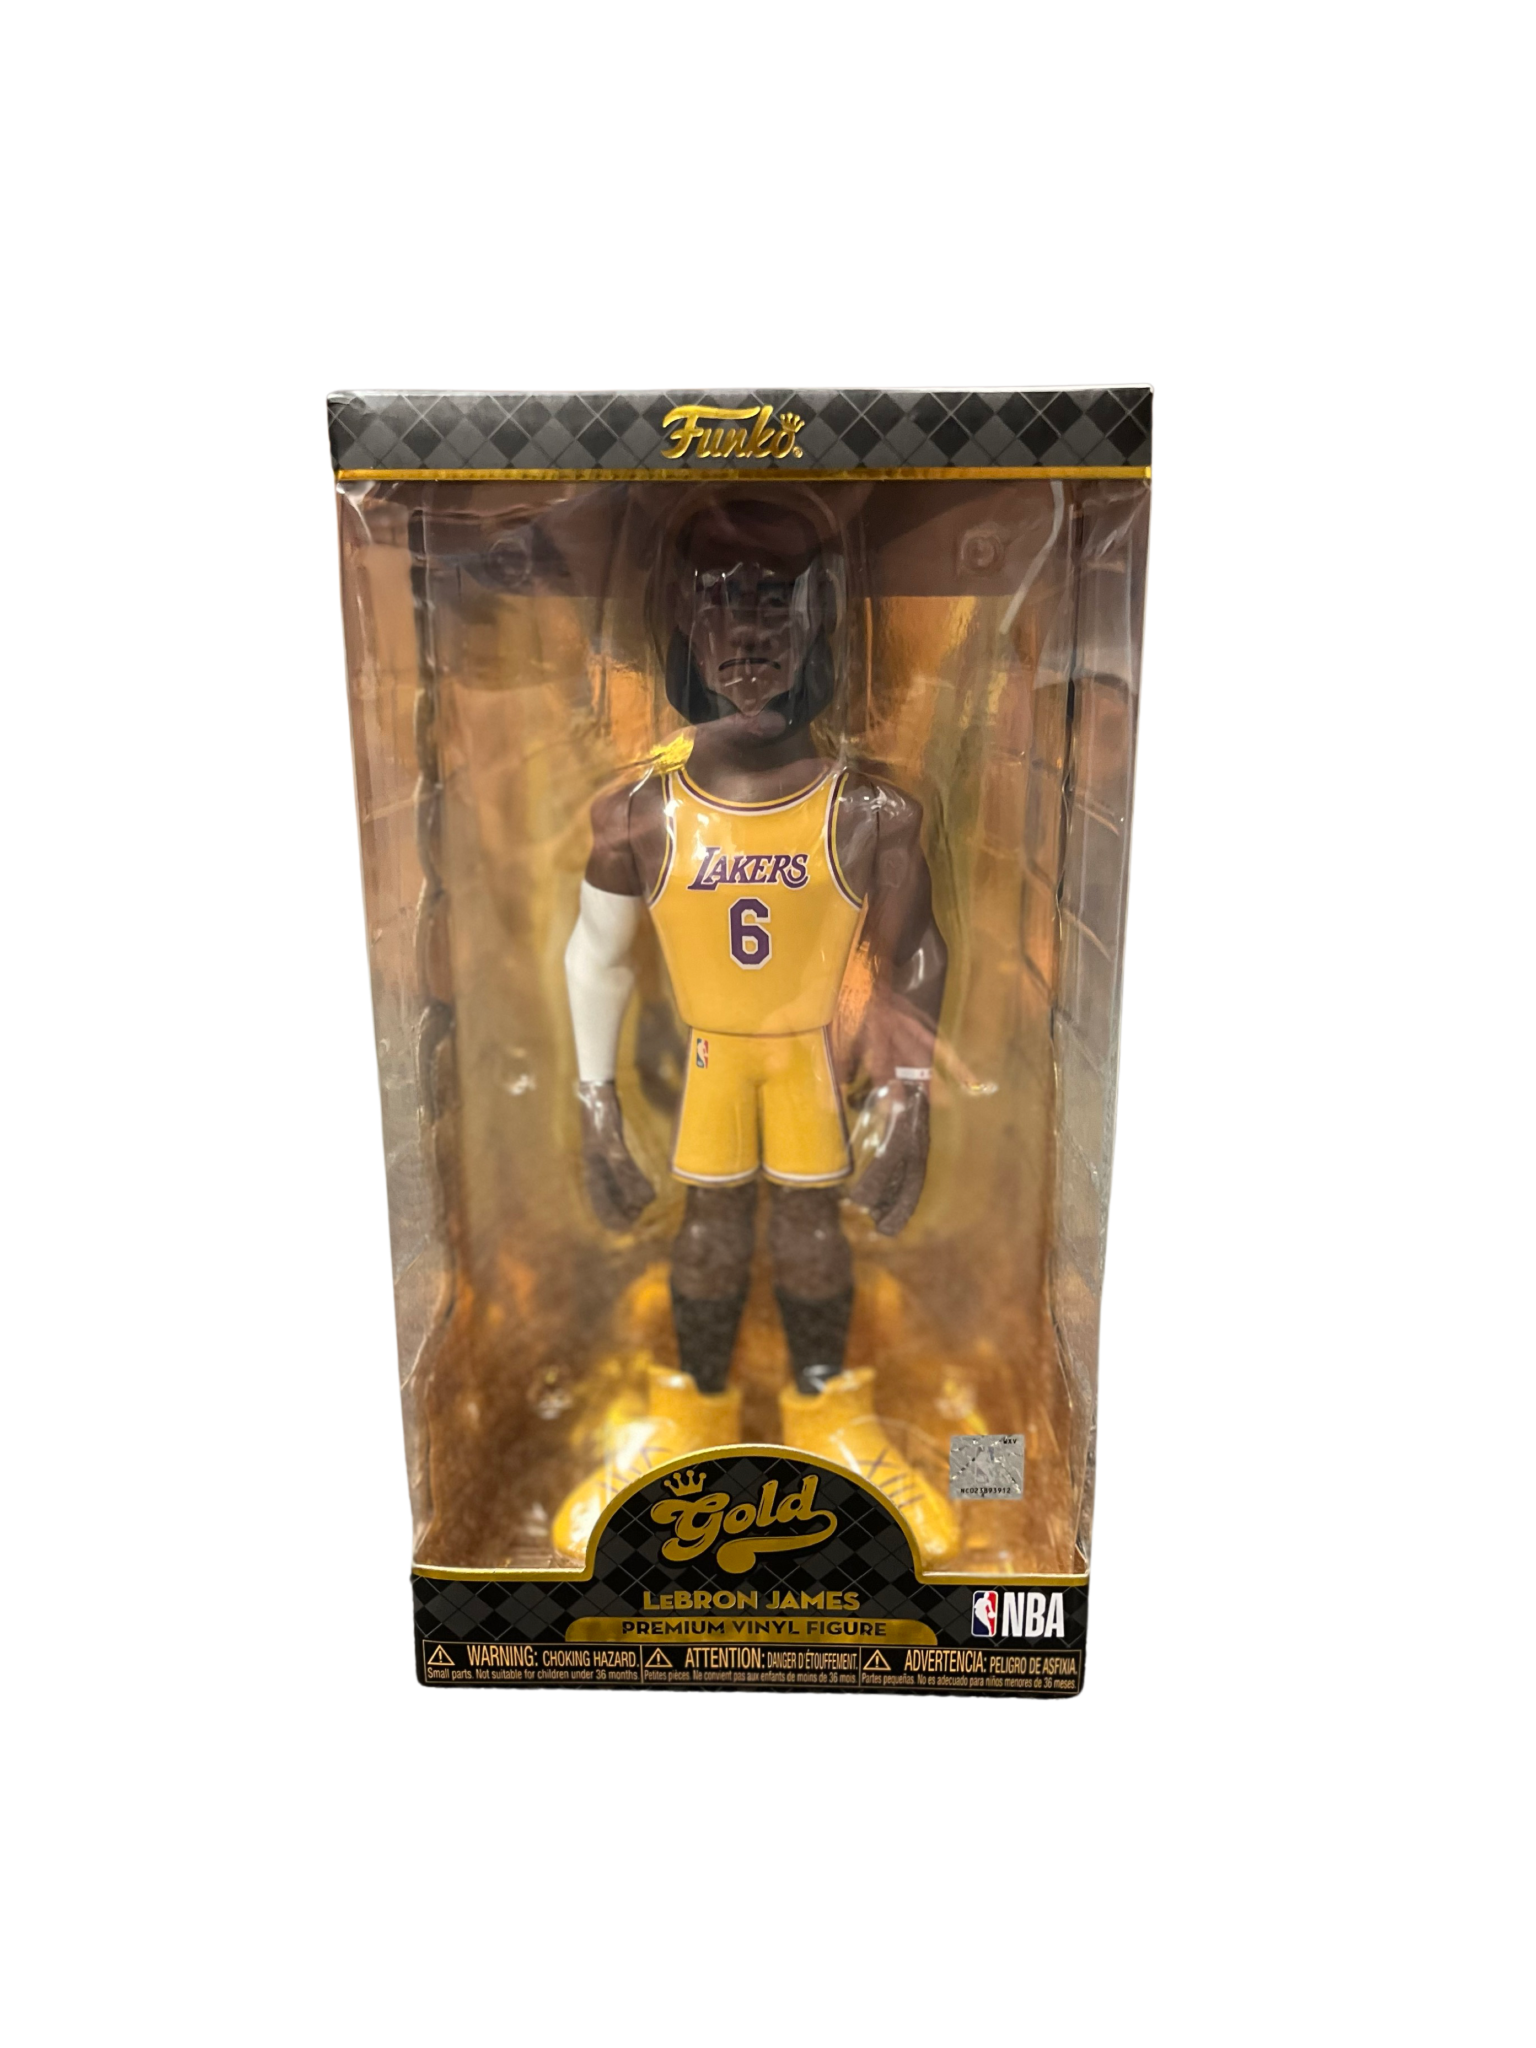 ONLY 3,000 PIECES Lebron James Limited LE Funko Gold 12 Inch Los Angeles NBA